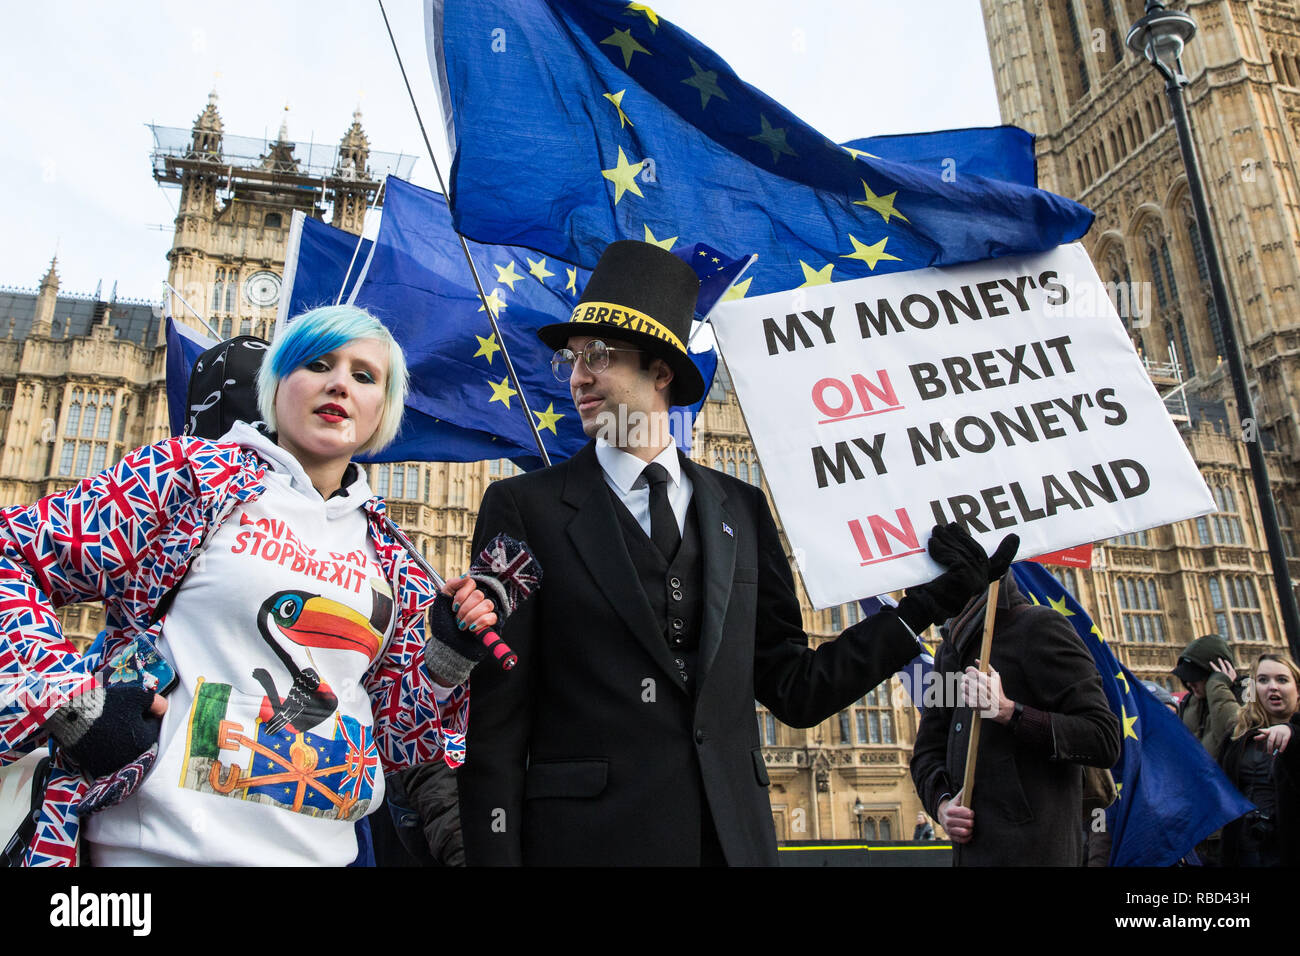 London, UK. 9th Jan, 2019. EU Supergirl Madeleina Kay stands with a fellow anti-Brexit activist disguised as Jacob Rees-Mogg and carrying a sign reading 'My Money's on Brexit My Money's in Ireland' during a protest by pro-EU group SODEM (Stand of Defiance European Movement) outside Parliament on the first day of the debate in the House of Commons on Prime Minister Theresa May's proposed Brexit withdrawal agreement. Credit: Mark Kerrison/Alamy Live News Stock Photo